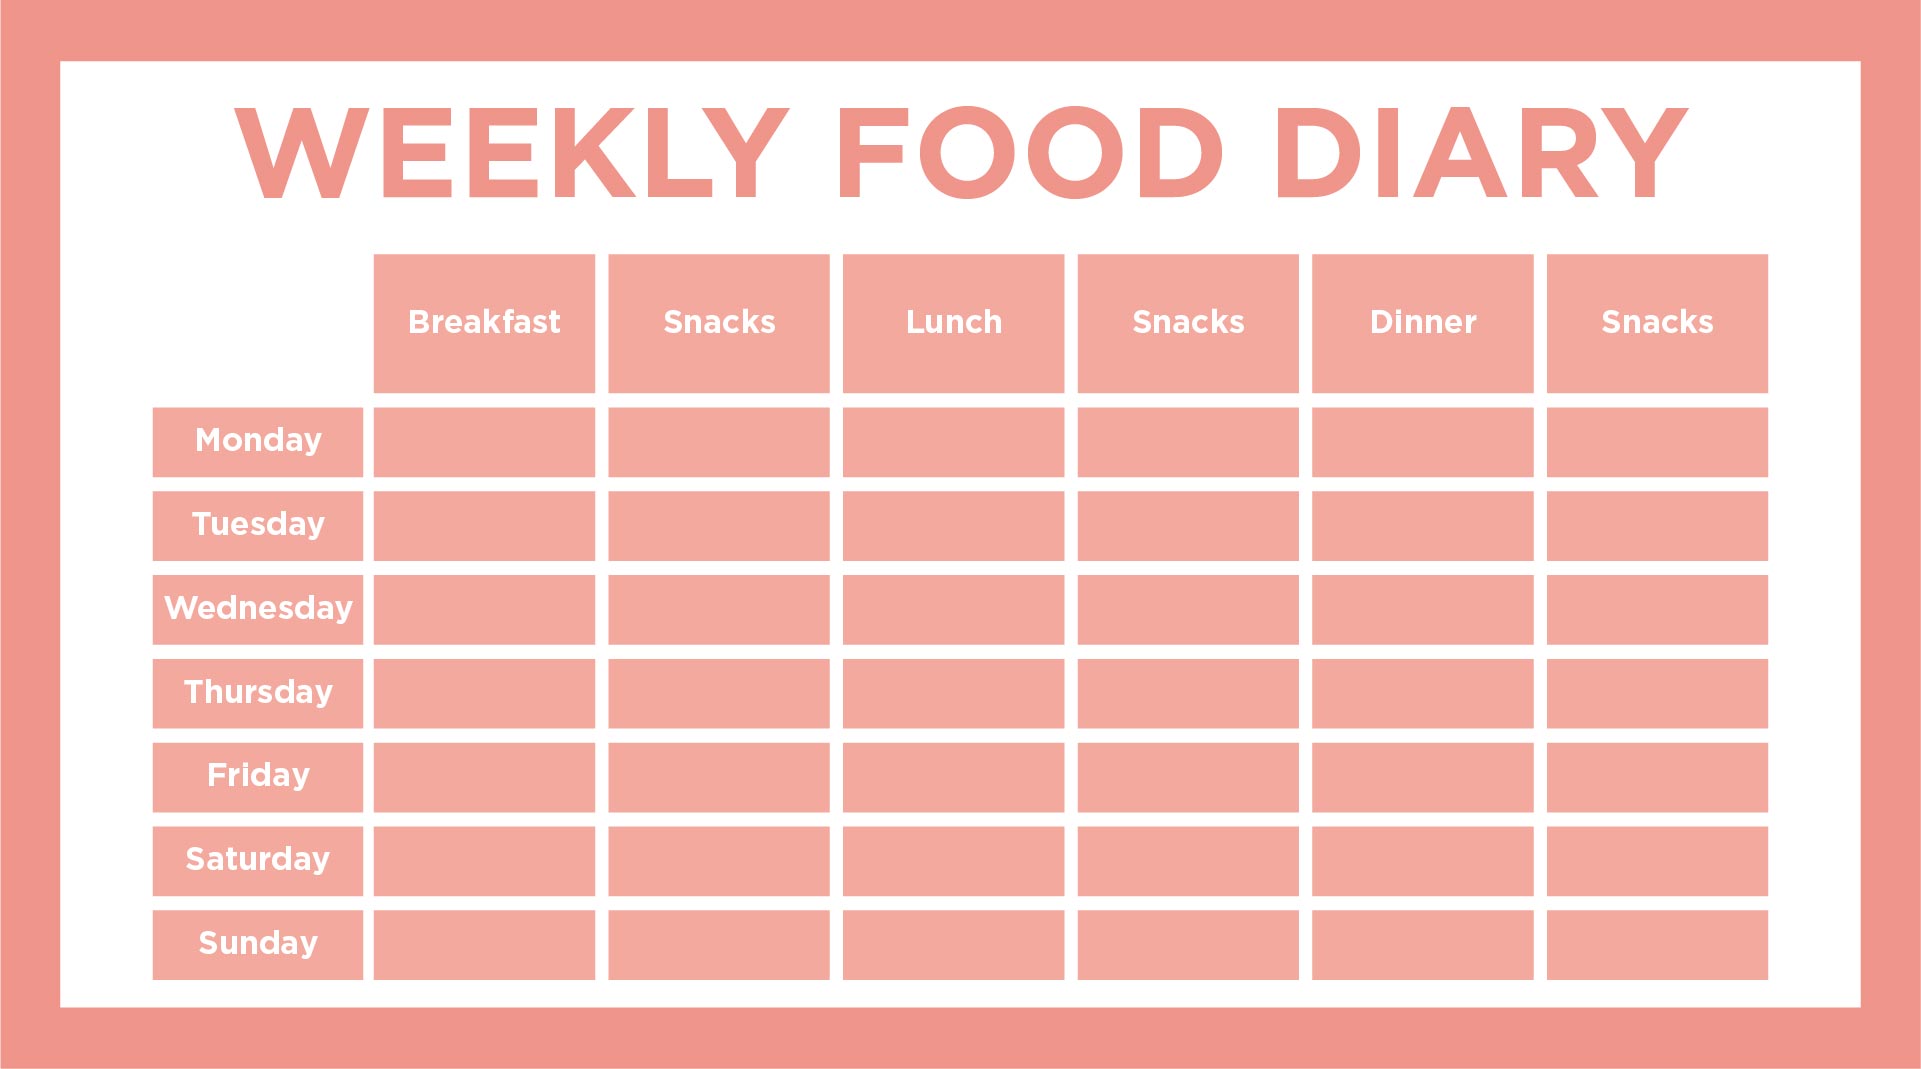 7 Best Images of Printable 7-Day Food Log 5 Meals A Day - Food Diary